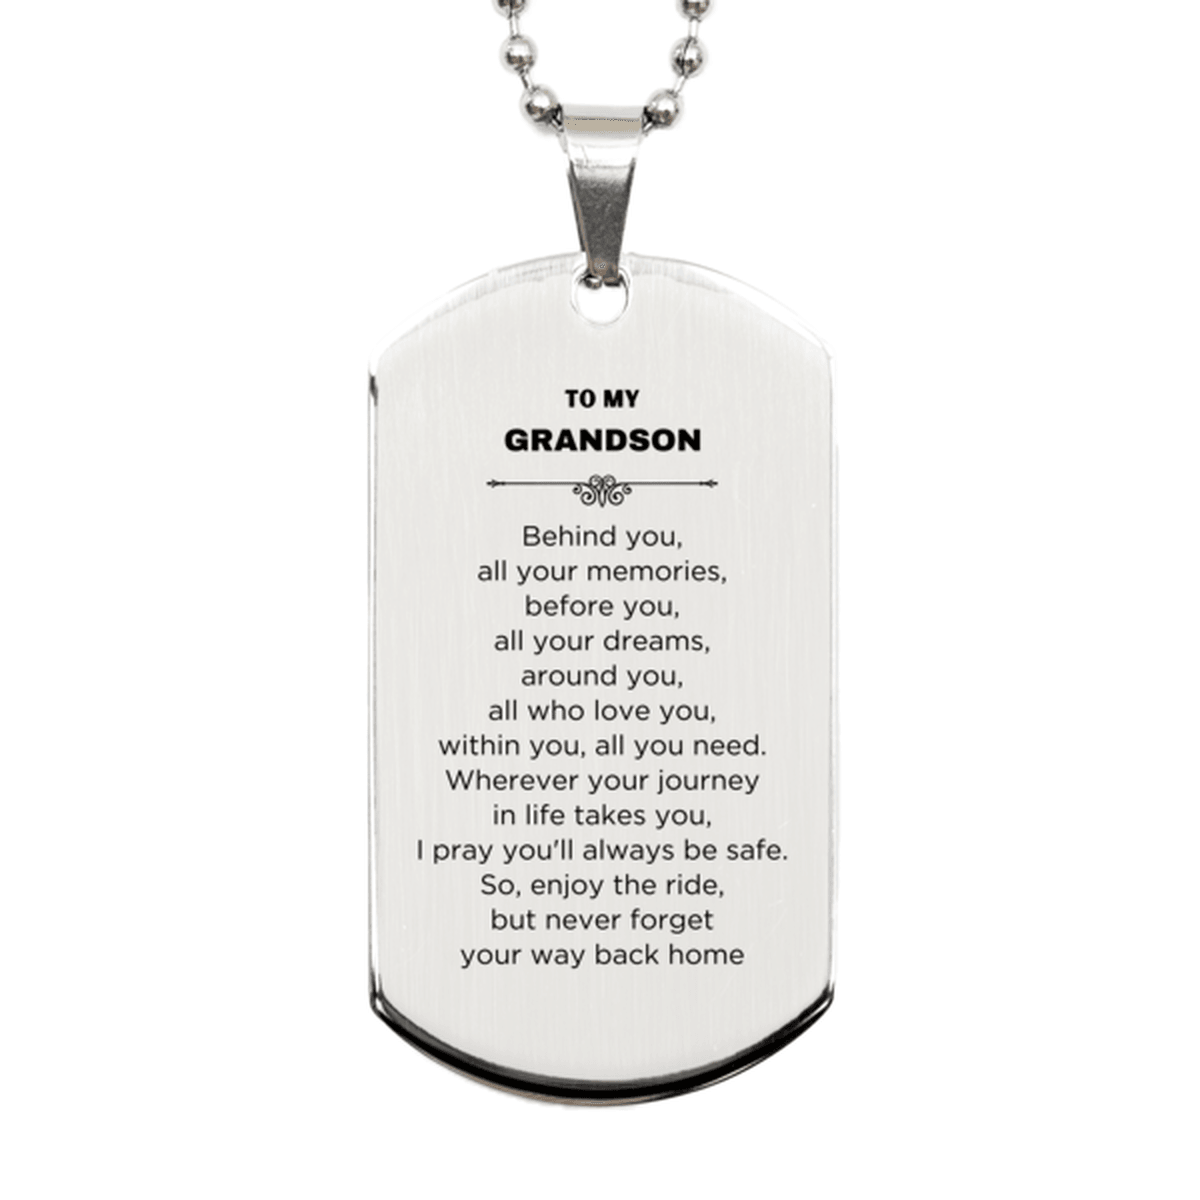 Inspirational Grandson Engraved Silver Dog Tag Necklace - Behind you, all your Memories, Before you, all your Dreams - Birthday, Christmas Holiday Gifts - Mallard Moon Gift Shop